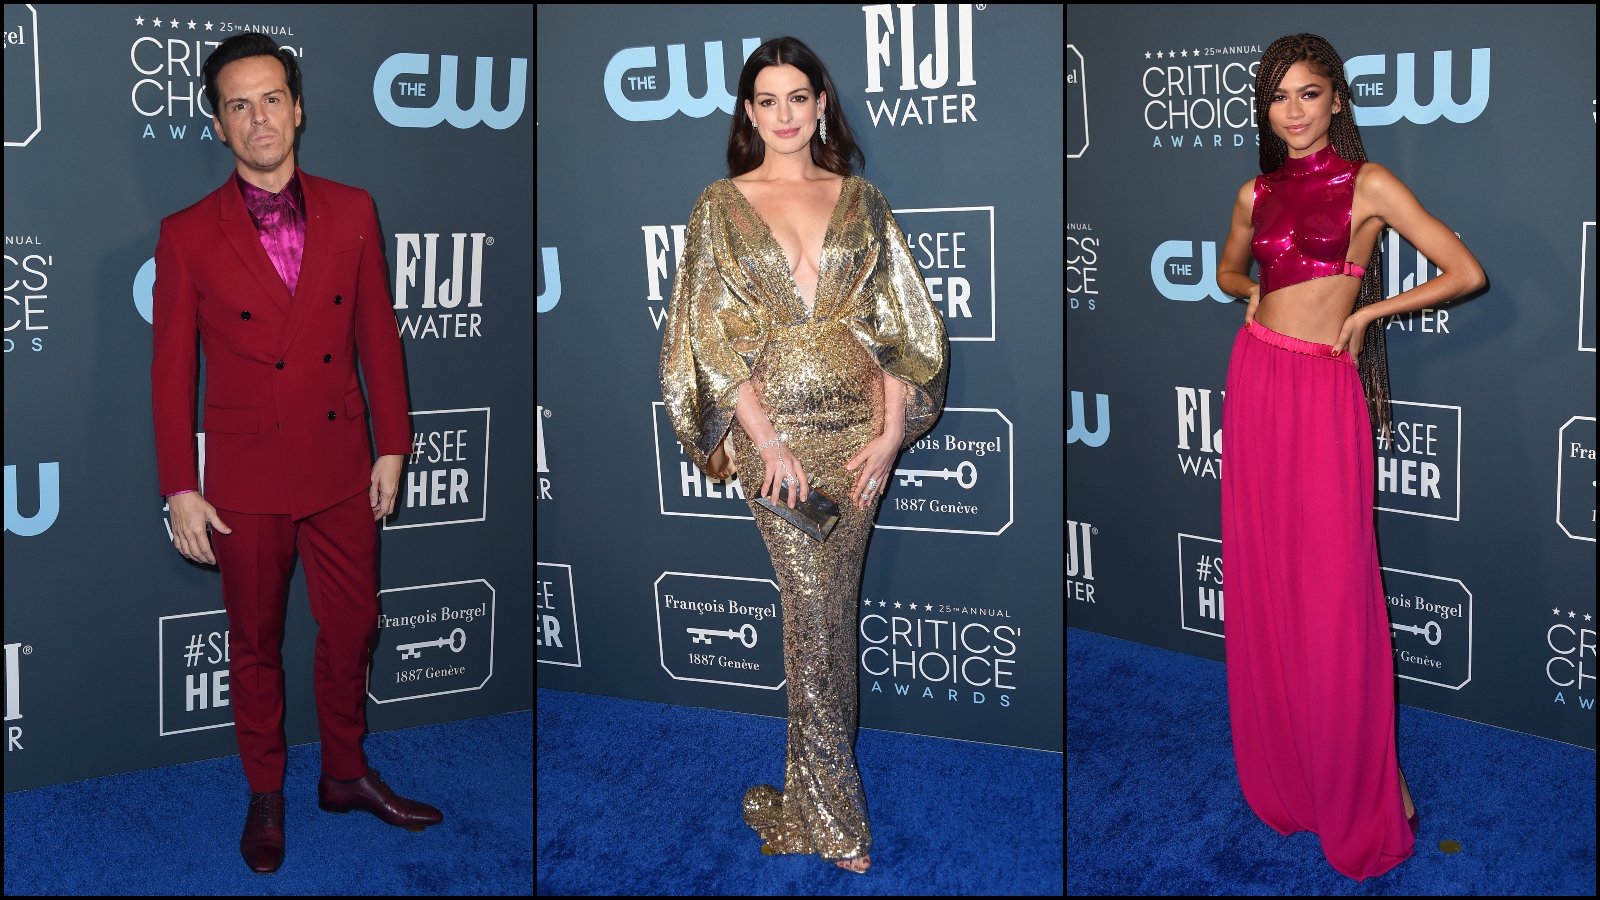 2022 Critics' Choice Awards: Best Looks That Ruled the Red Carpet